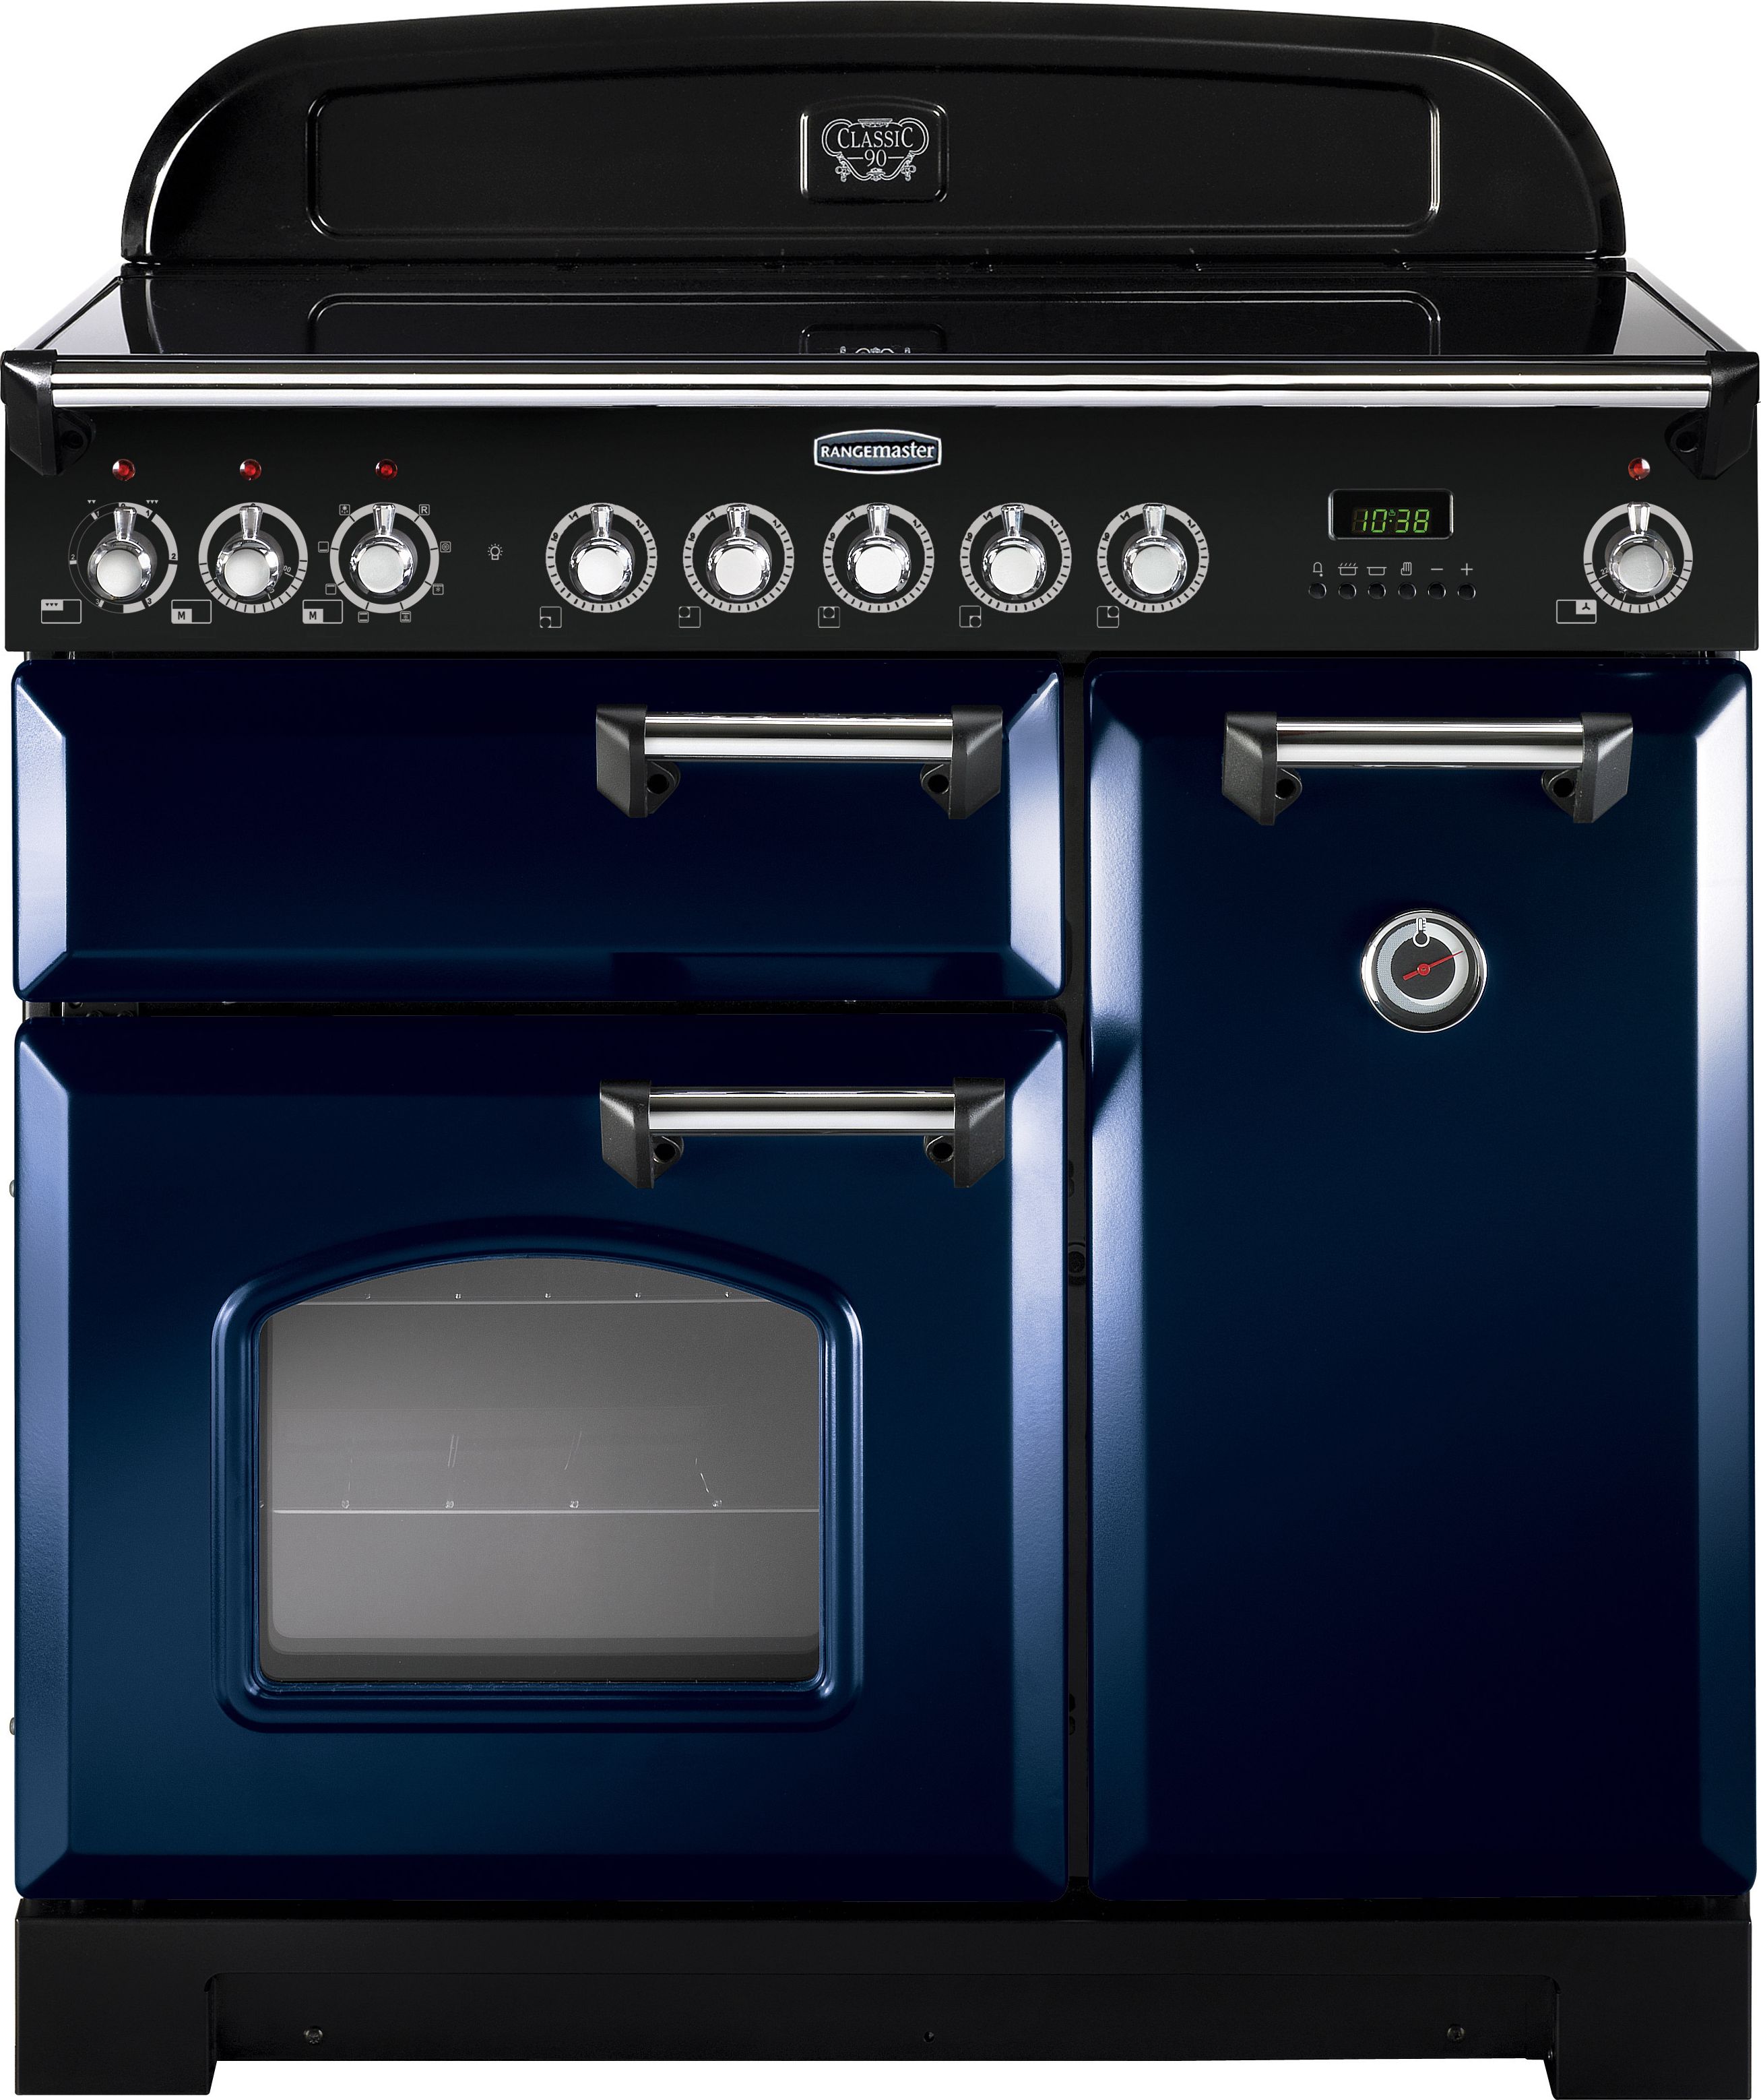 Rangemaster Classic Deluxe CDL90ECRB/C 90cm Electric Range Cooker with Ceramic Hob - Regal Blue / Chrome - A/A Rated, Blue